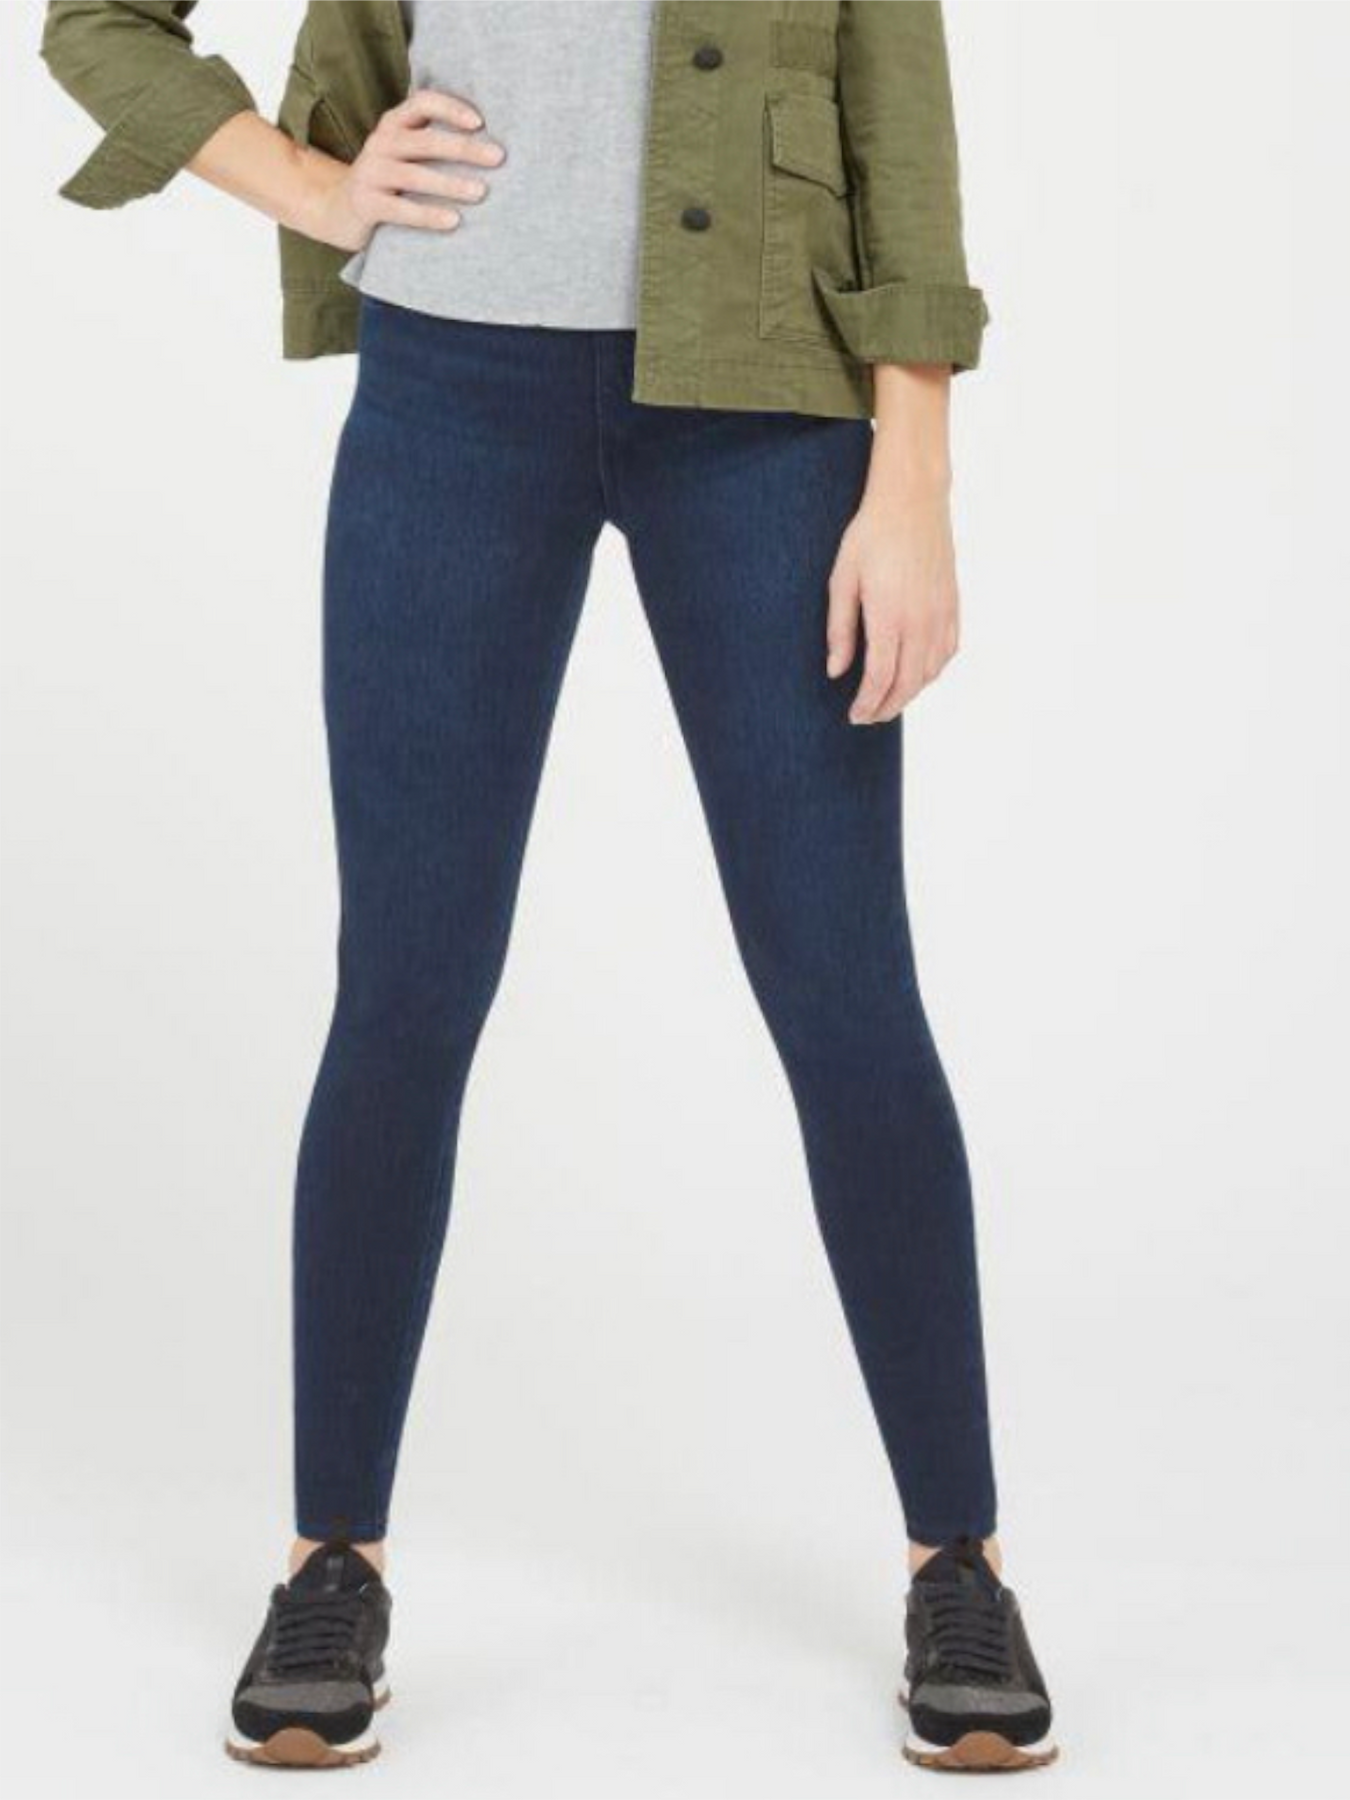 Spanx Jean-ish Ankle Length Leggings-Twilight Rinse-Small A368975